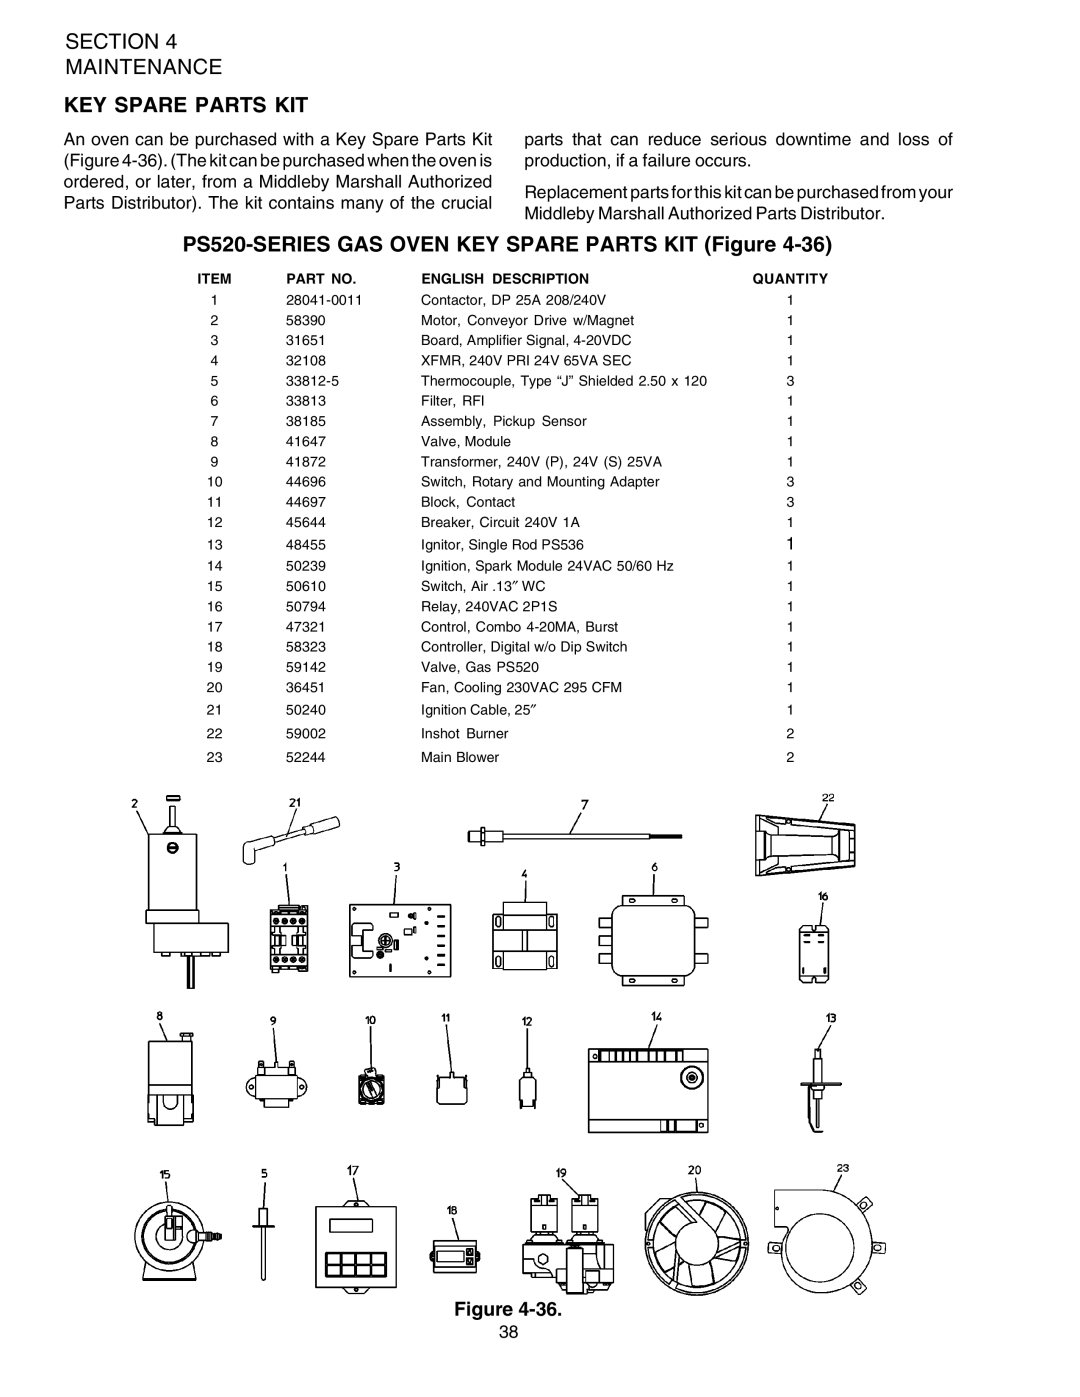 Middleby Marshall PS520G installation manual Key Spare Parts Kit, PS520-SERIESGAS OVEN KEY SPARE PARTS KIT Figure 